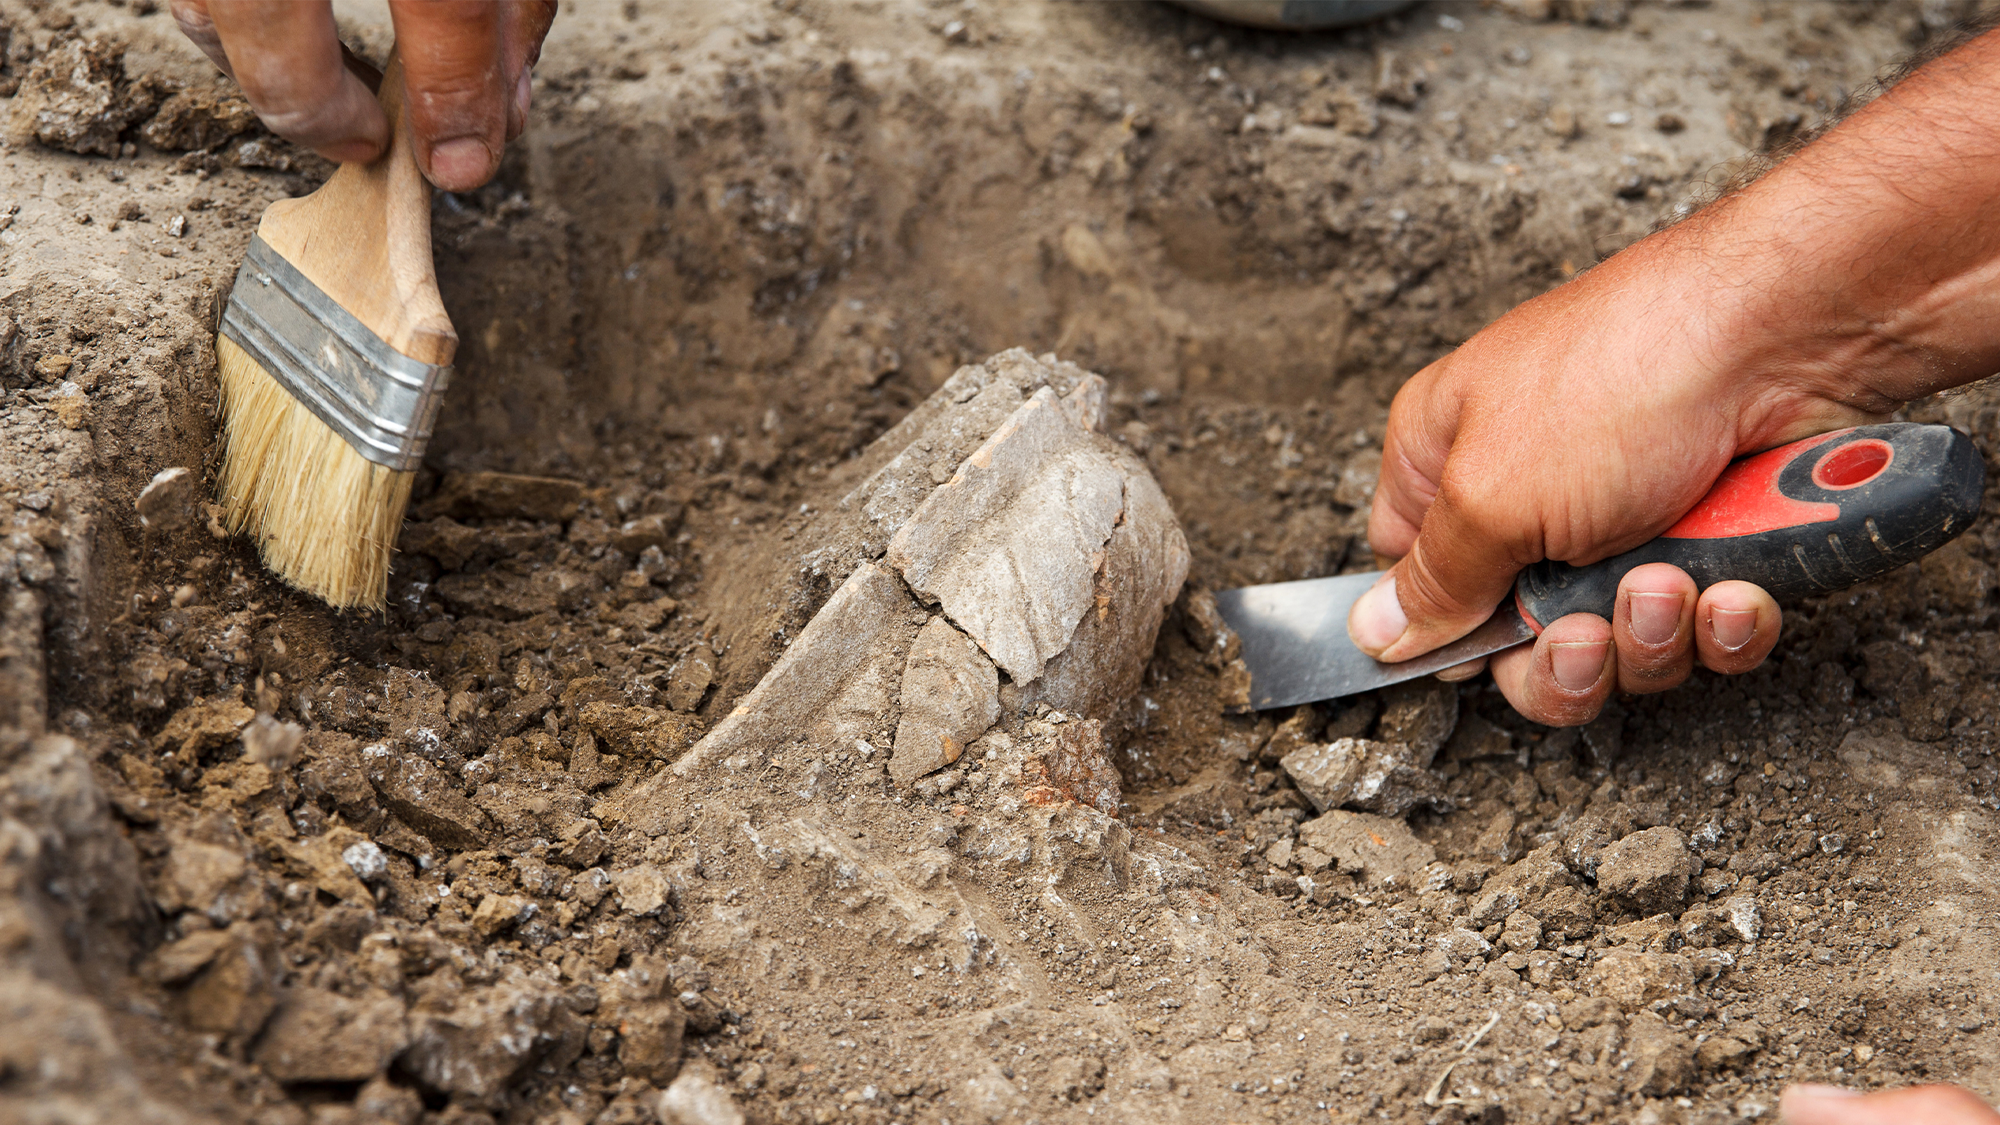 Archaeologists dig in the dirt with a brush and scraper.